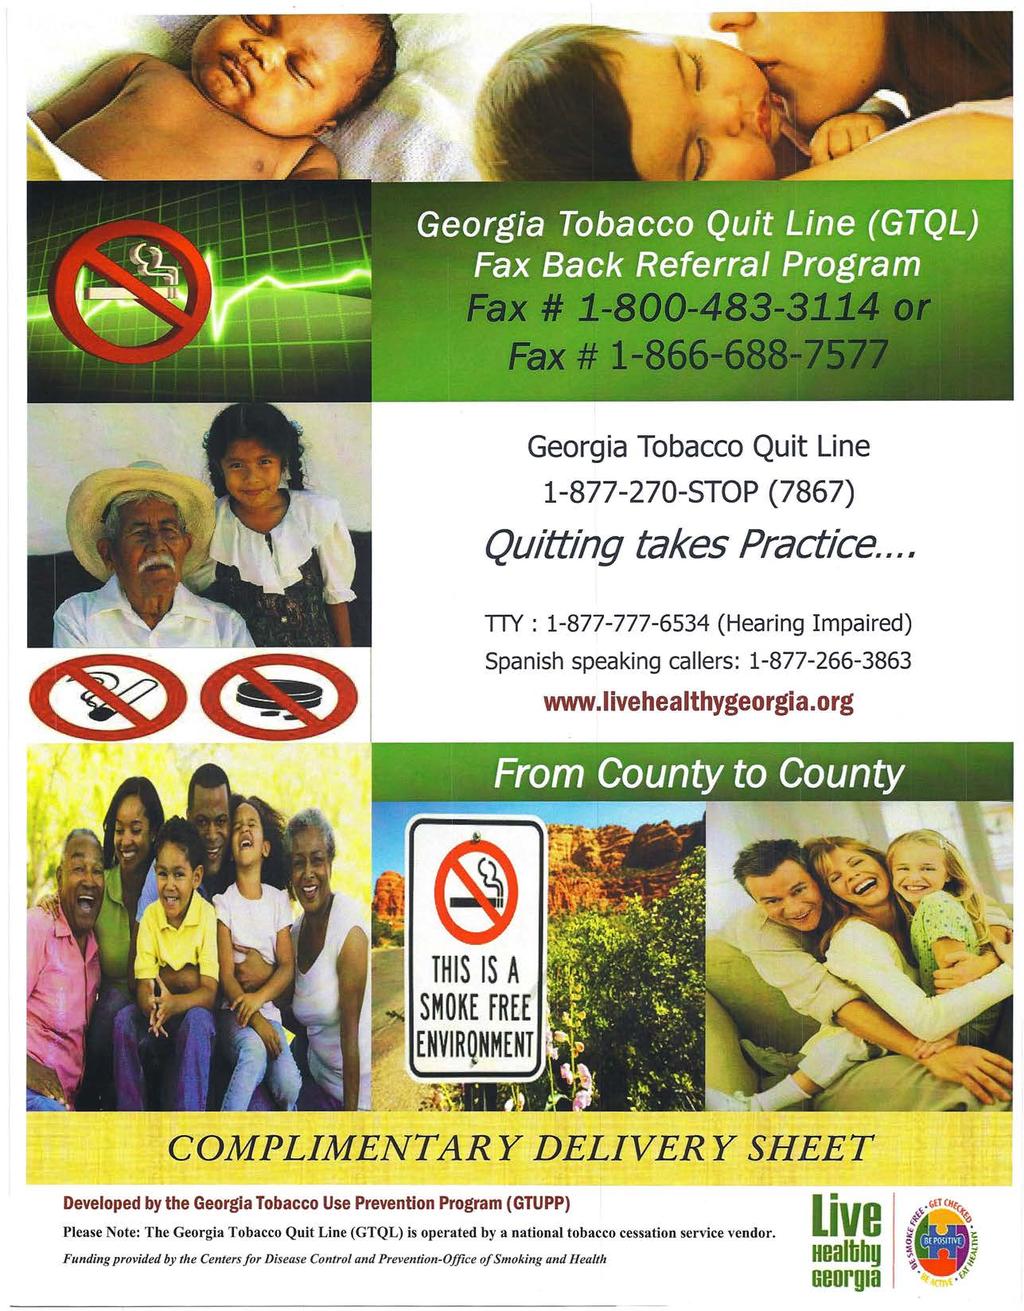 Georgia Tobacco Quit Line 1-877-270-STOP (7867) Quitting takes Practice... TIY : 1-877-777-6534 (Hearing Impaired) Spanish speaking callers: 1-877-266-3863 www.livehealthgeorgia.